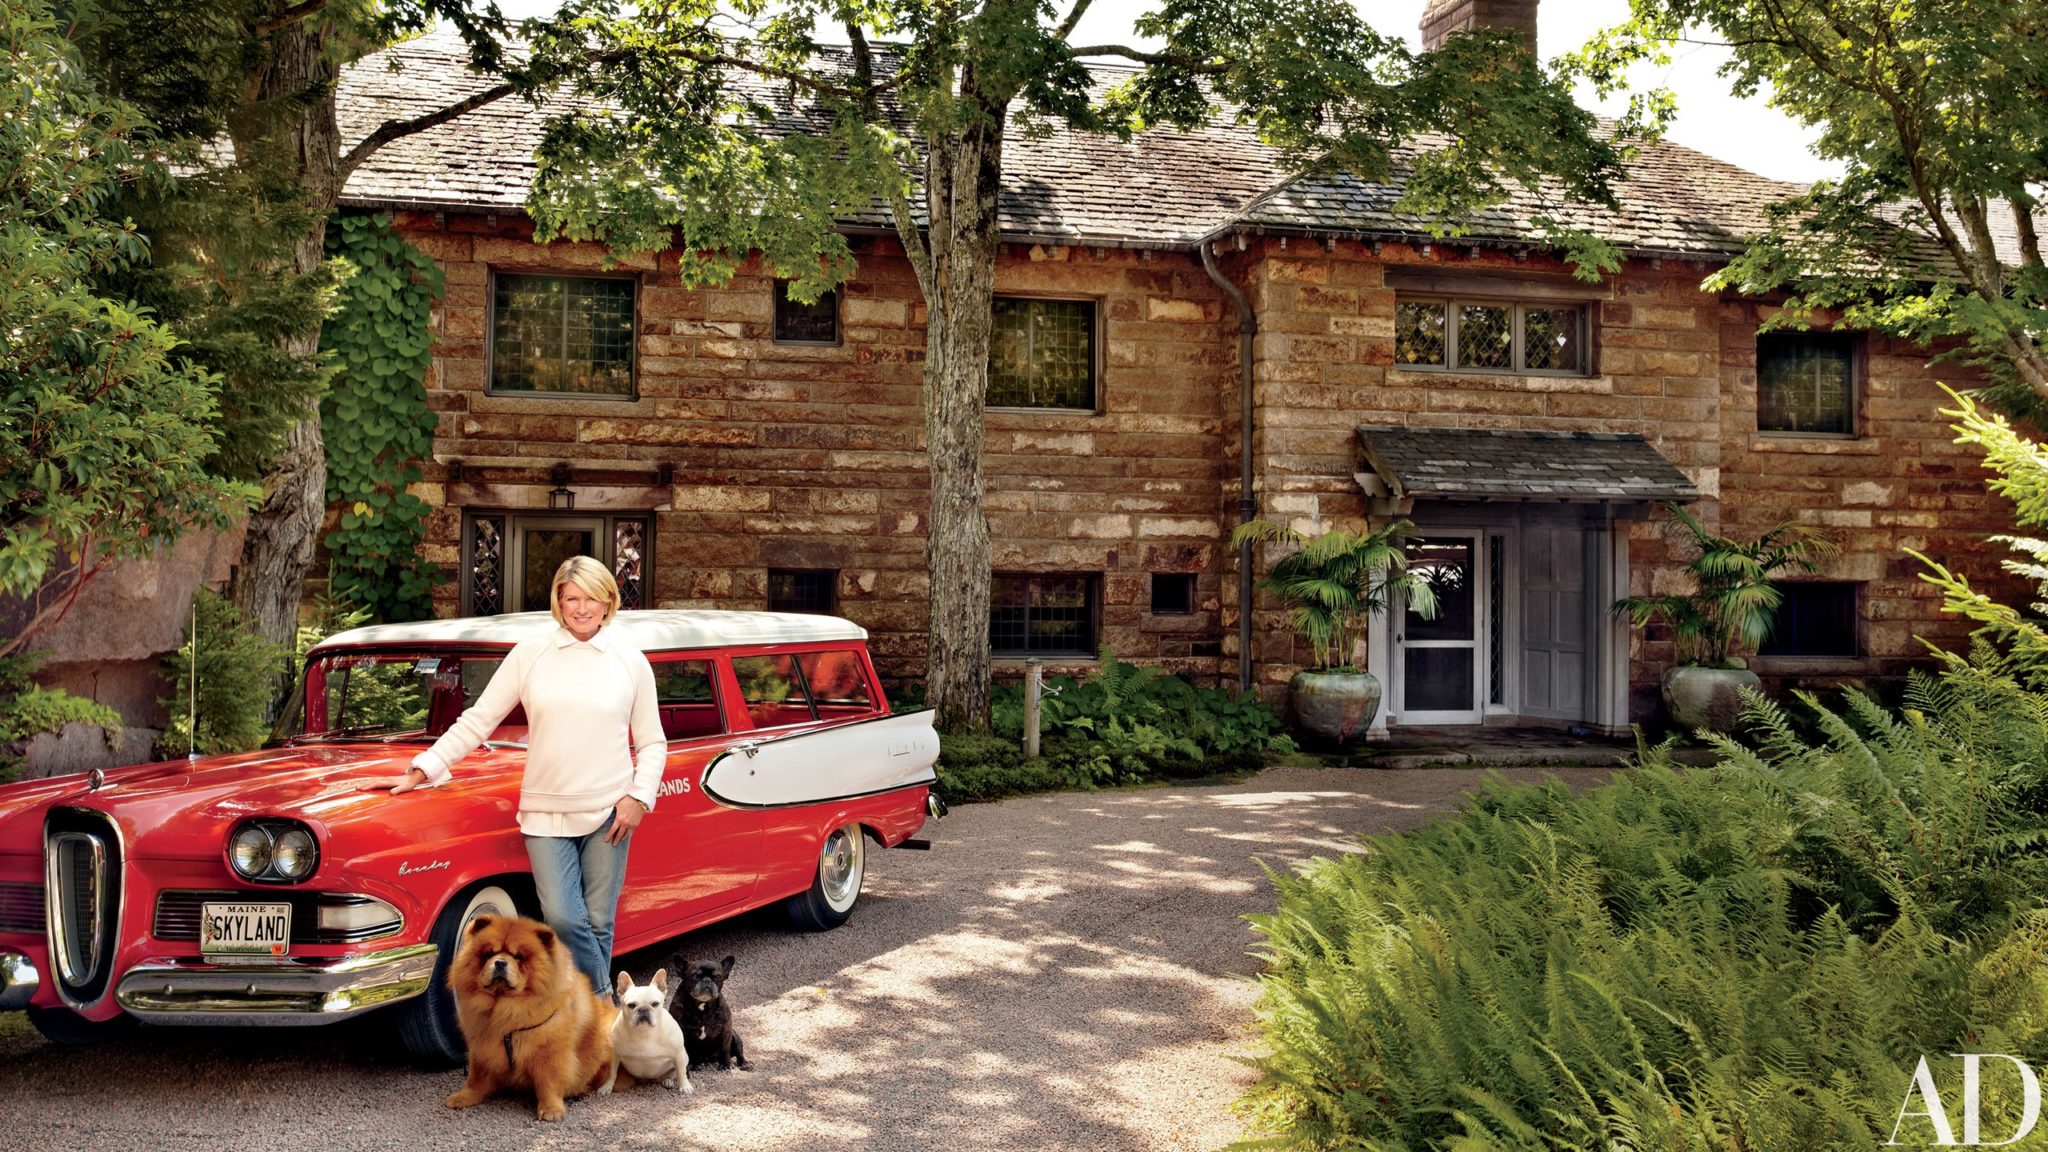 Martha Stewart to brand real estate developments in the United States, Europe, and Asia